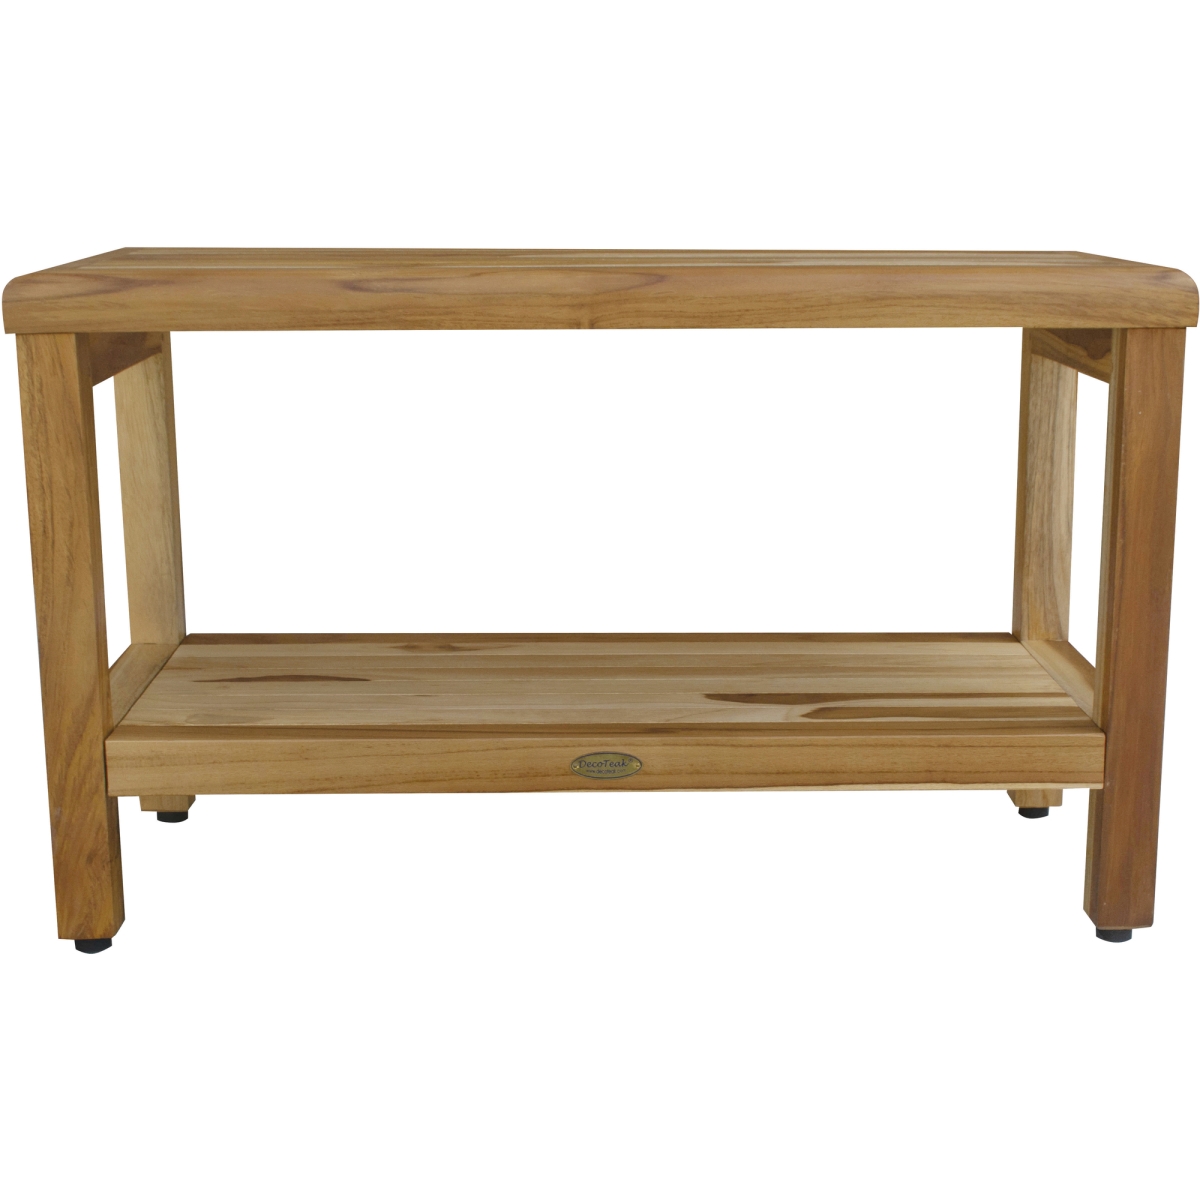 Picture of HomeRoots 376698 Rectangular Teak Shower Bench with Shelf in Natural